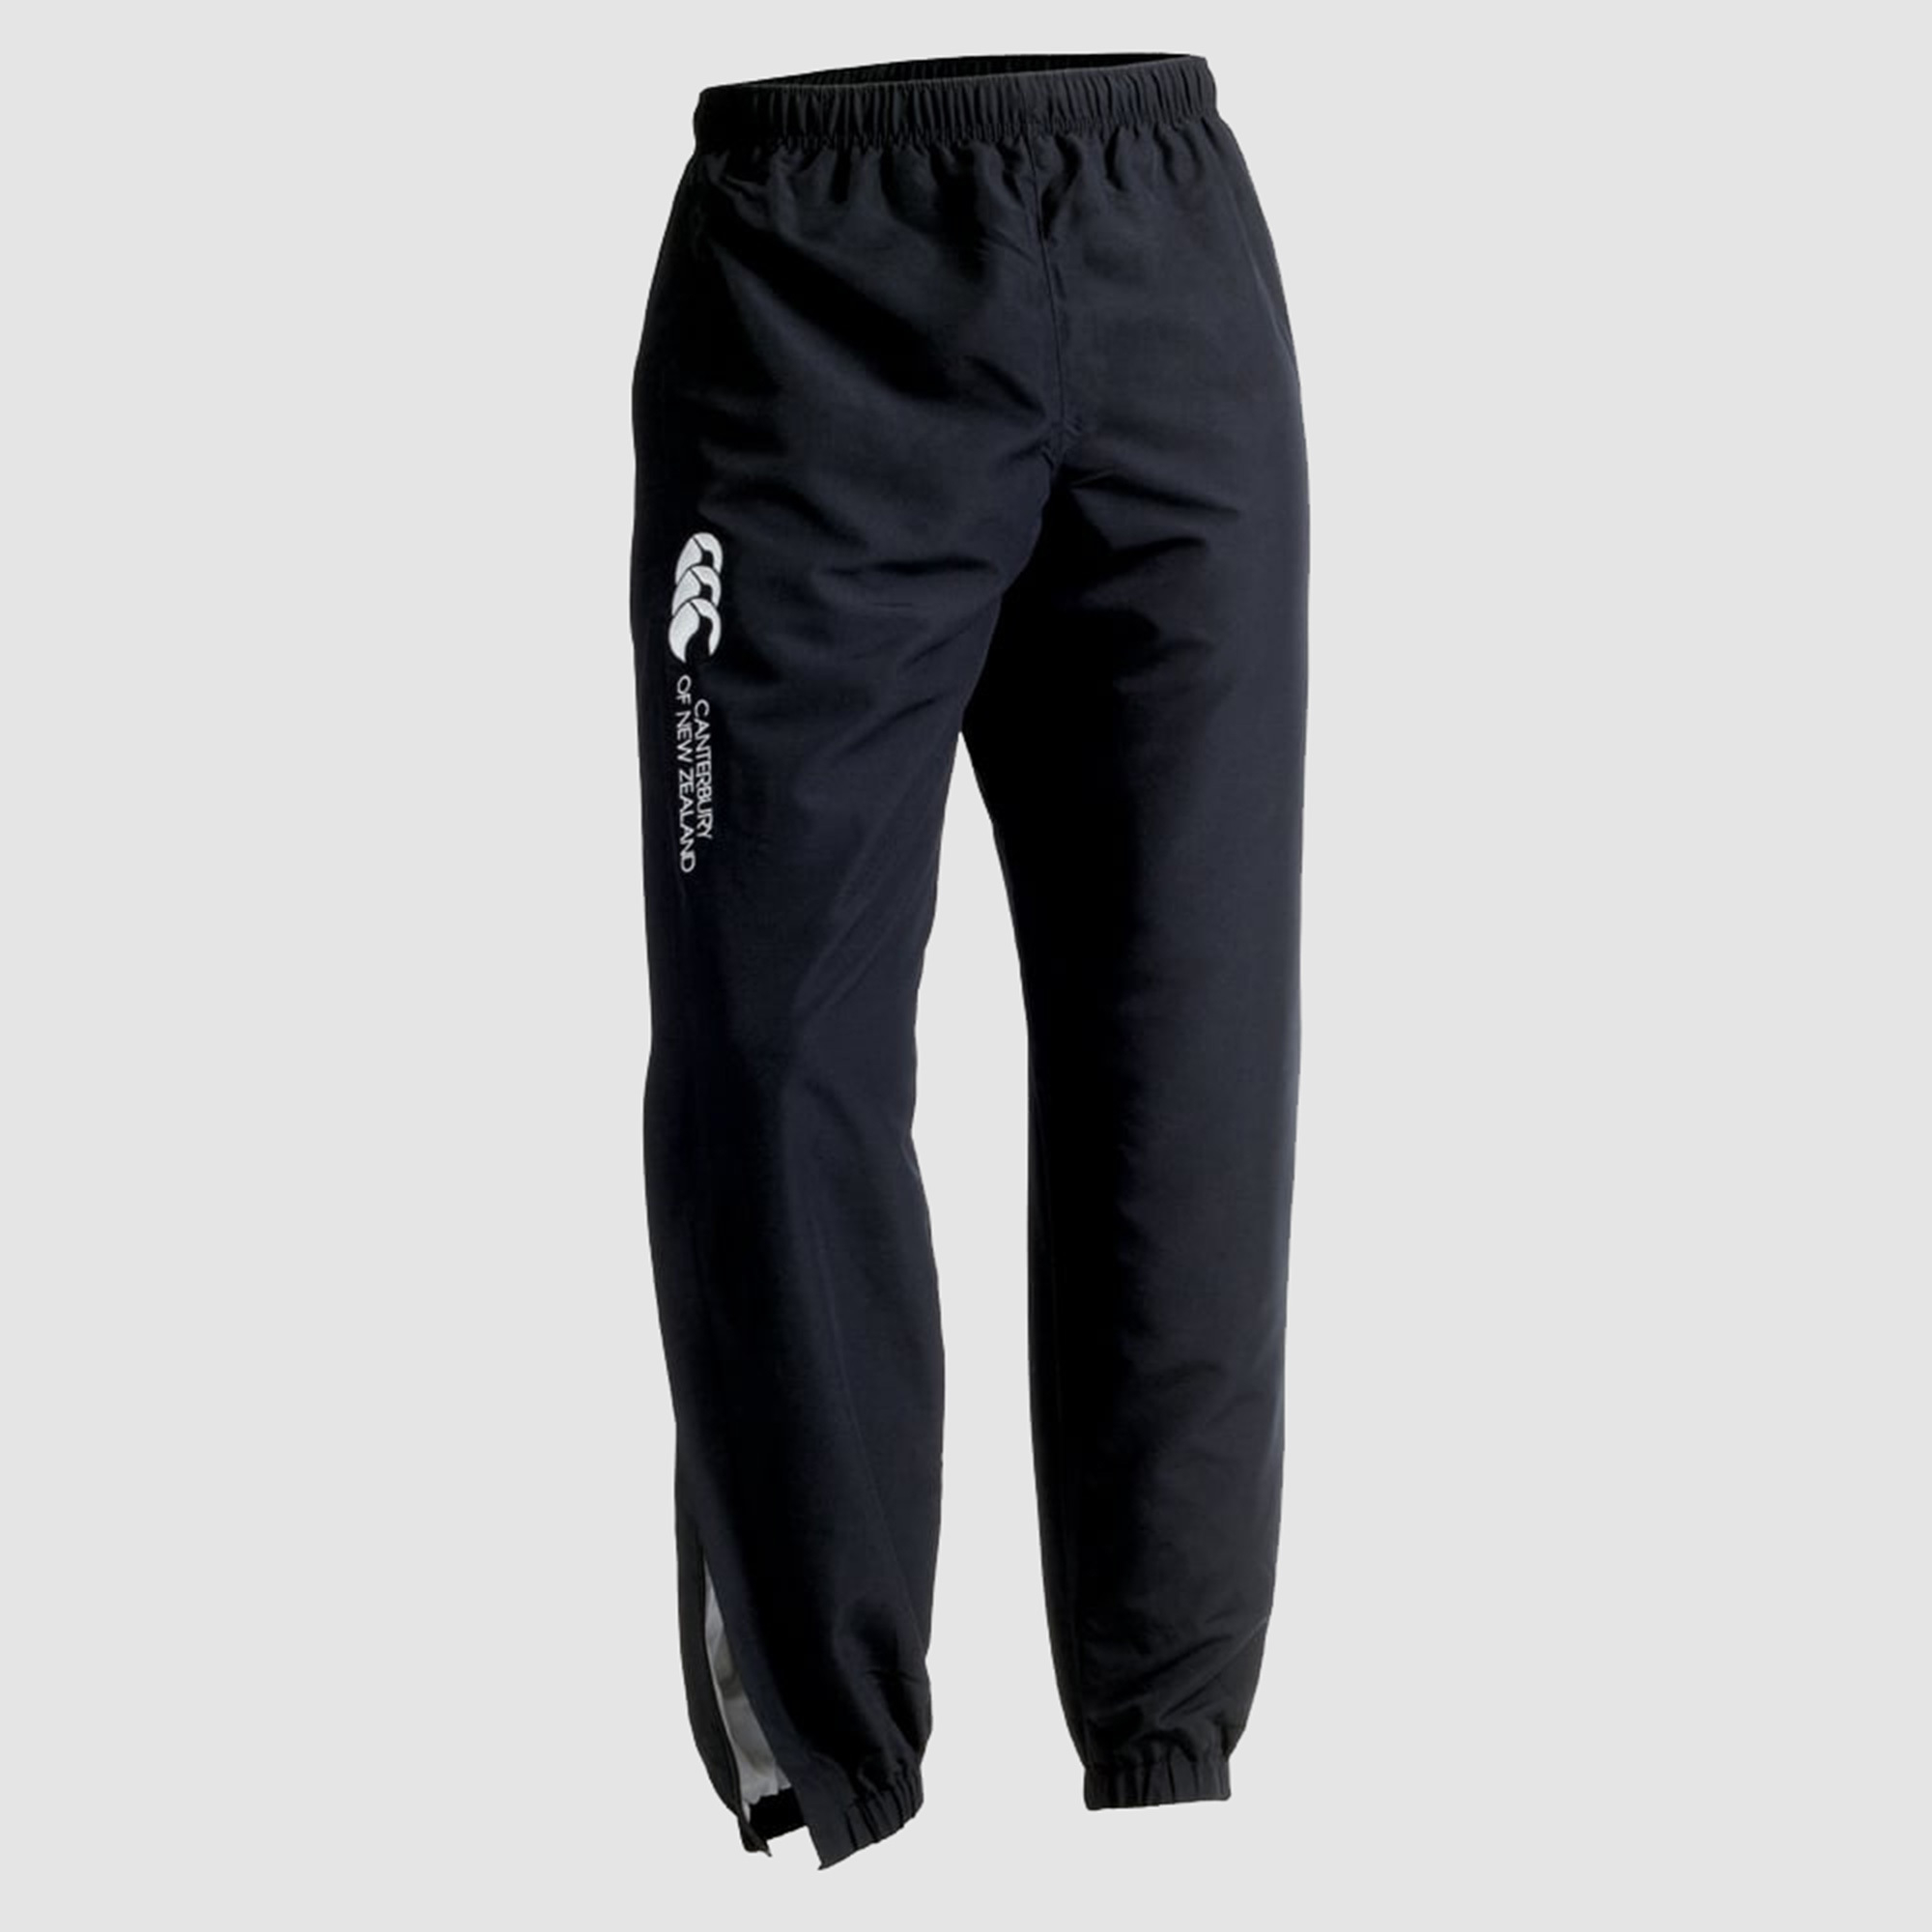 ADIDAS LADIES CUFFED TRACK PANTS - PERIWINKLE - Womens-Bottoms : Sequence  Surf Shop - ADIDAS W19